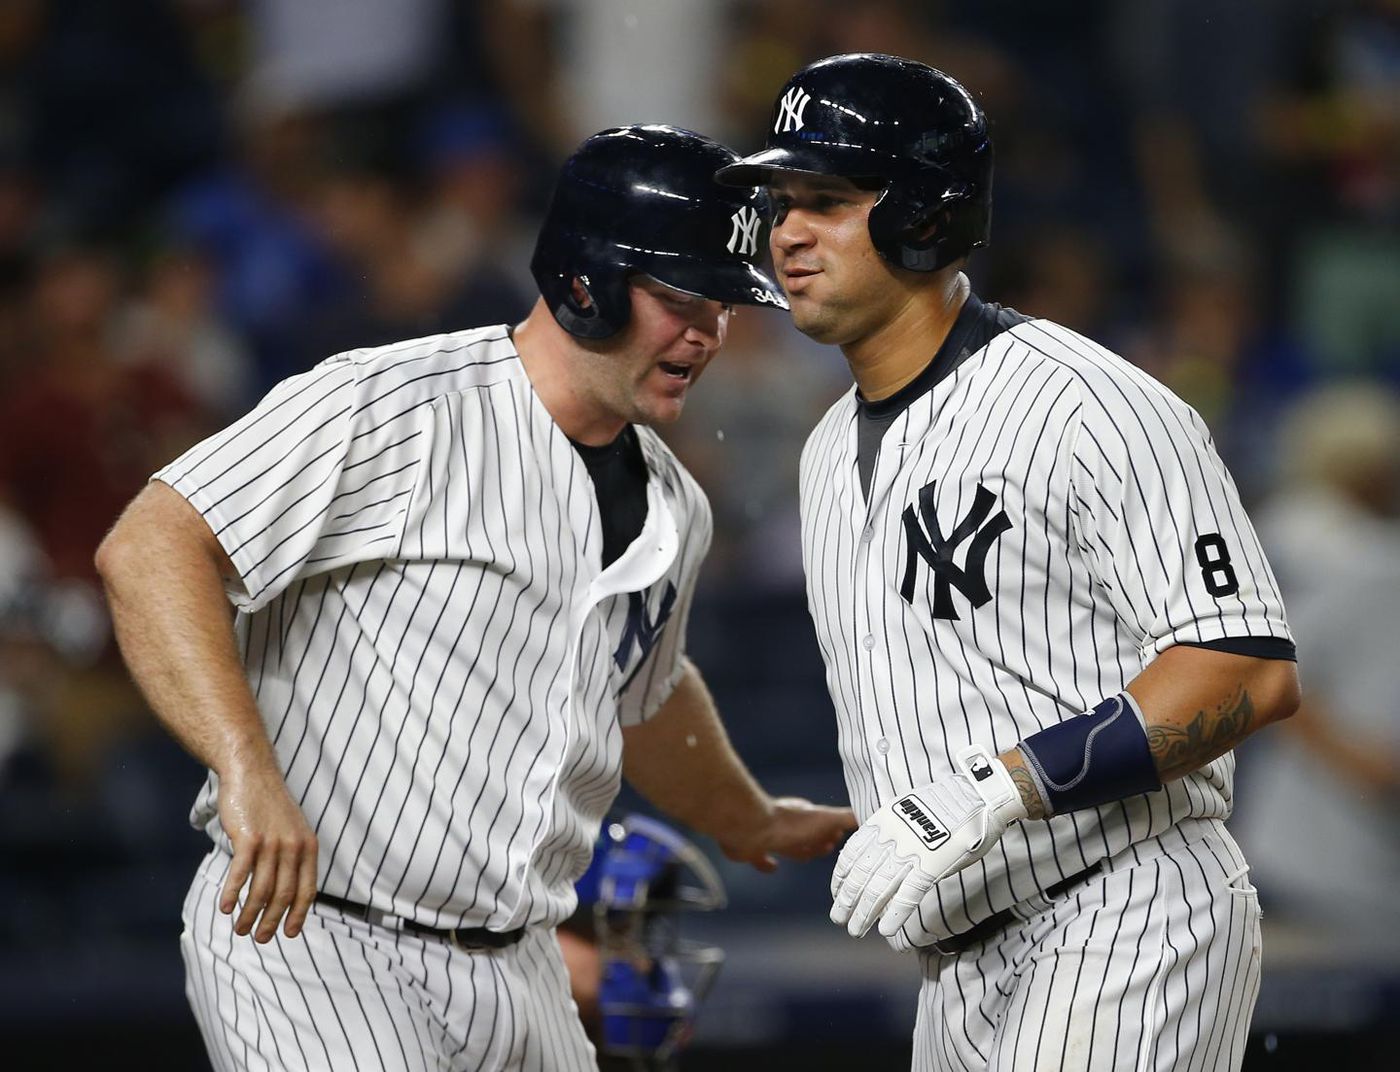 Ranking the best Yankees starting catchers over the last 10 years